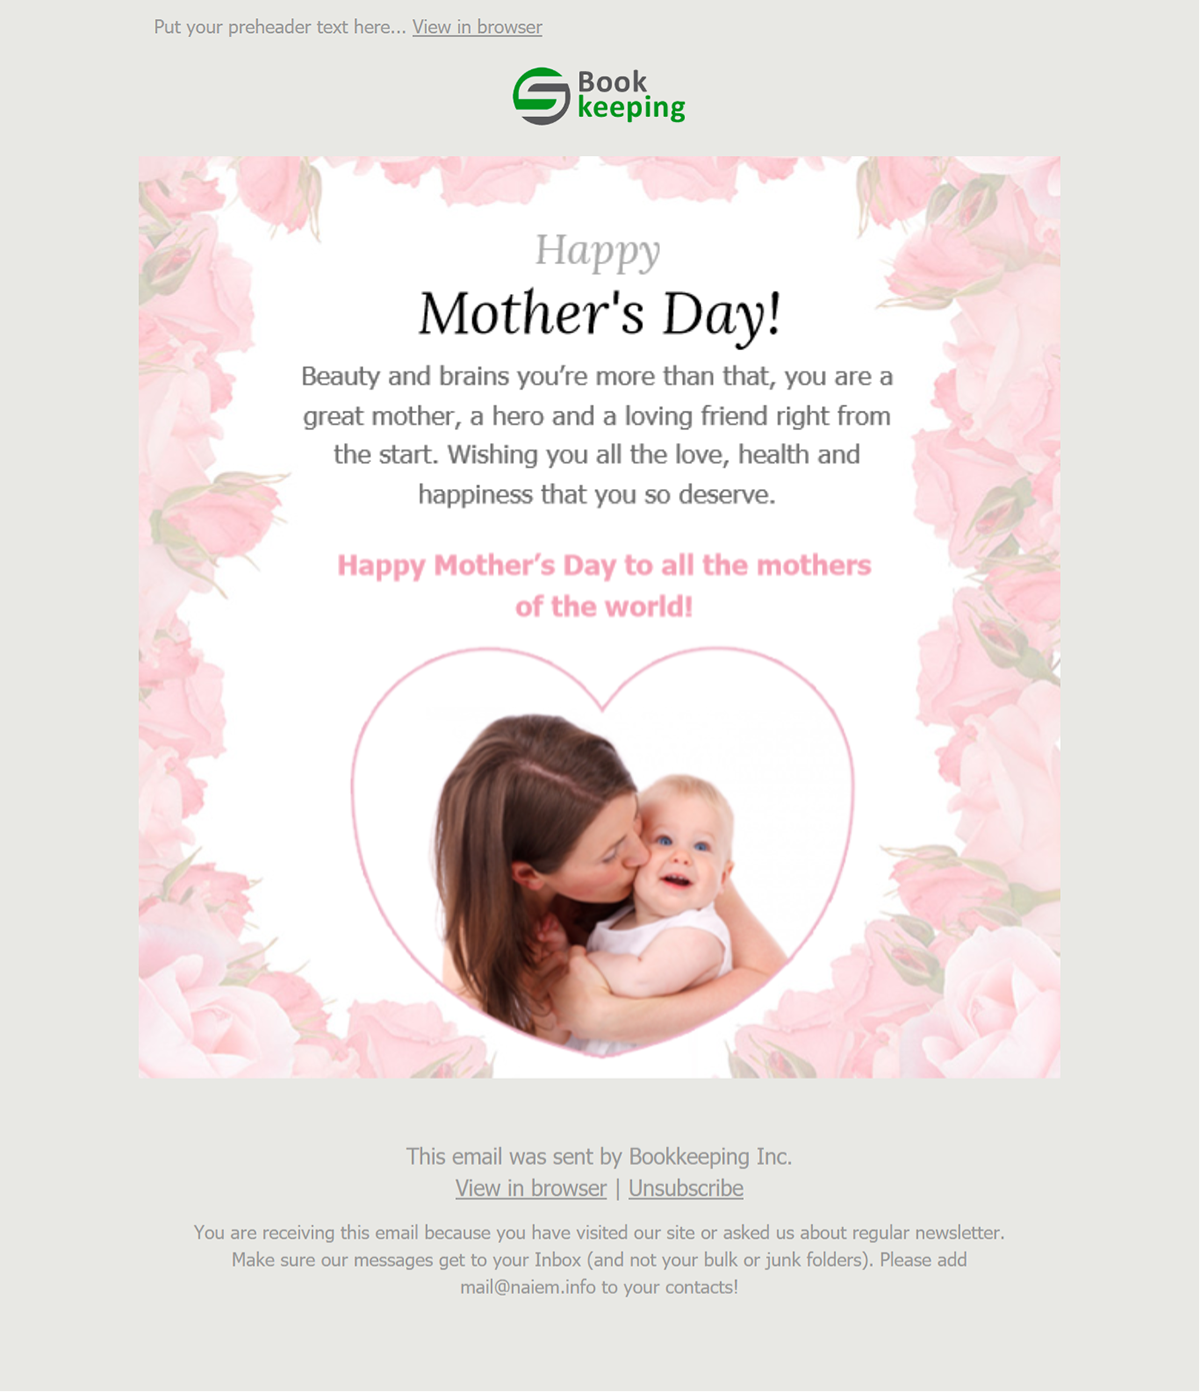 Email mailchimp email template responsive email Email For Finance financial email welcome email thank you email Email For Love Mother's Day